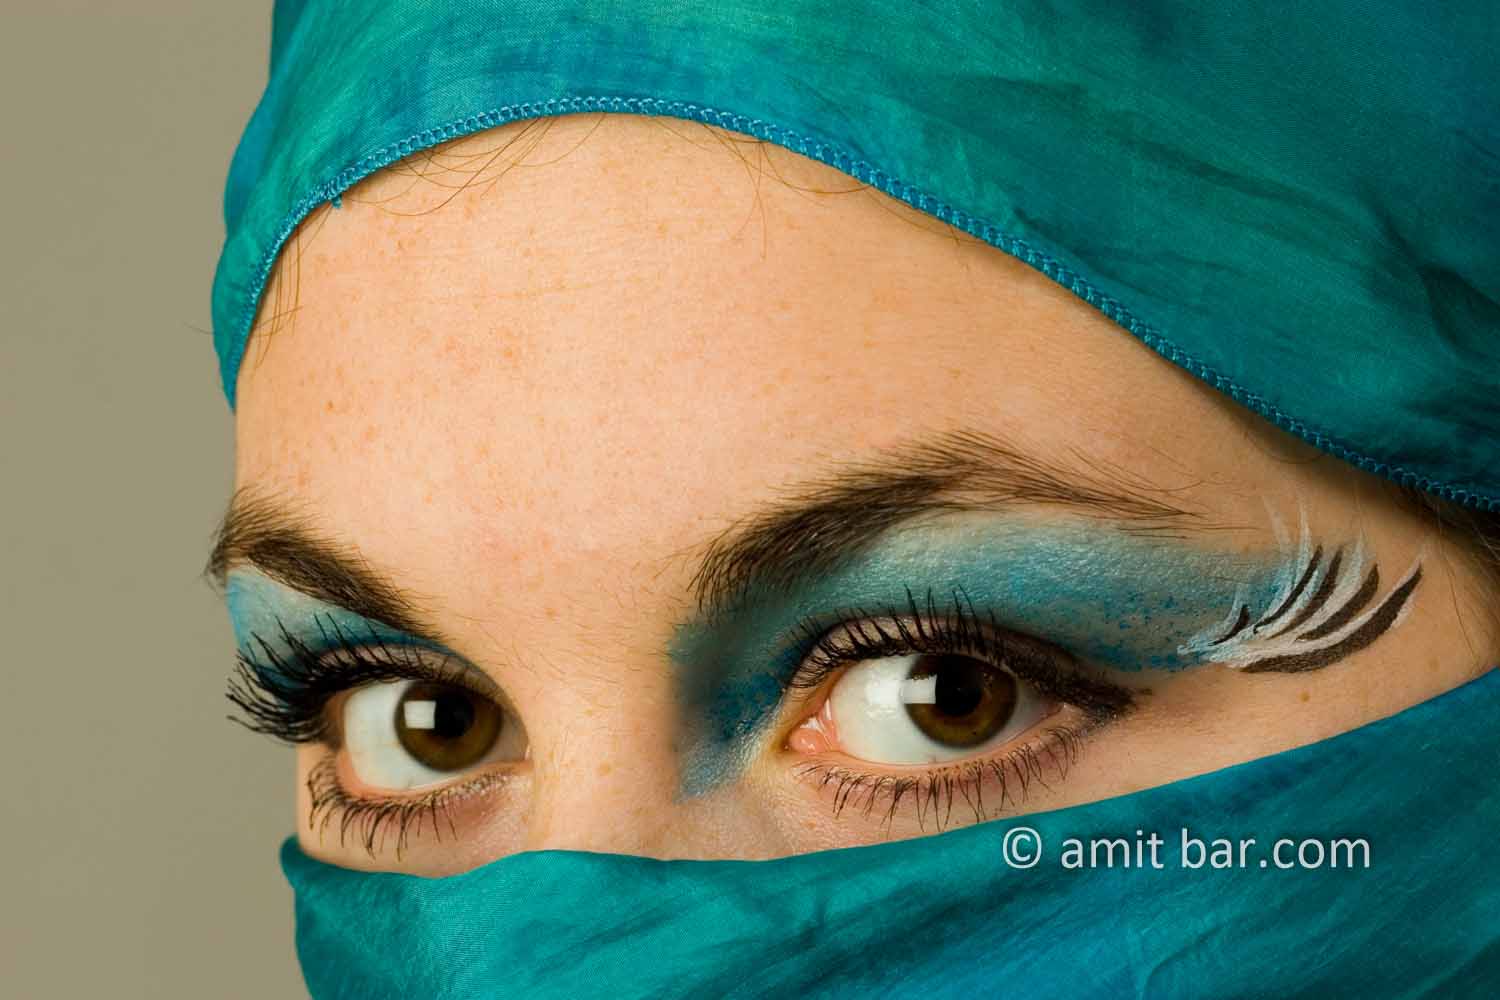 Eyes, hair and scarf VII: A girl with a blue headscarf and makeup